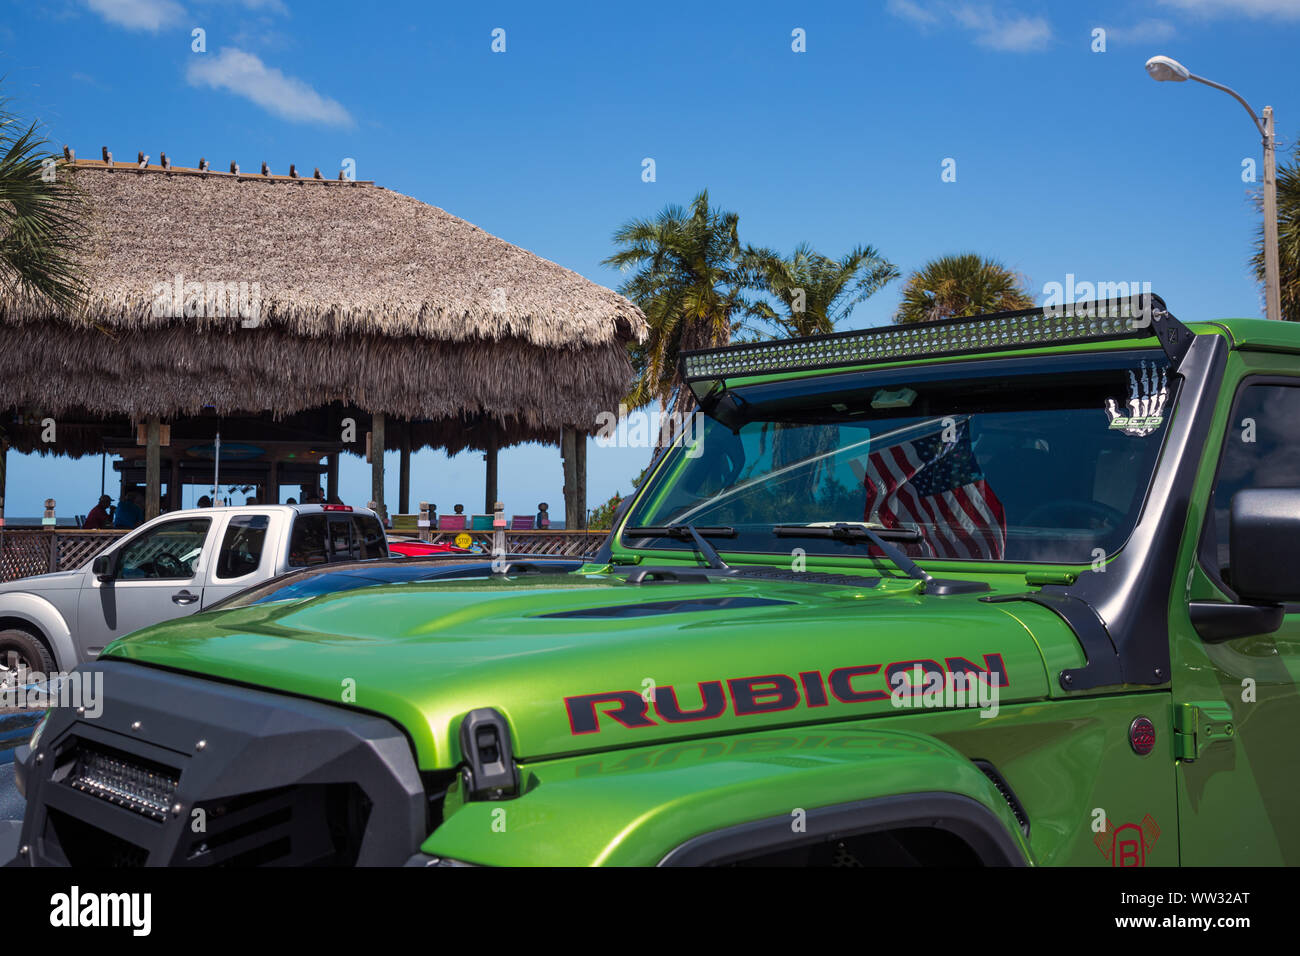 Stars and Stripes American flag reflected in the windscreen of a bright green Jeep Wrangler Rubicon, Hudson beach, Florida Stock Photo